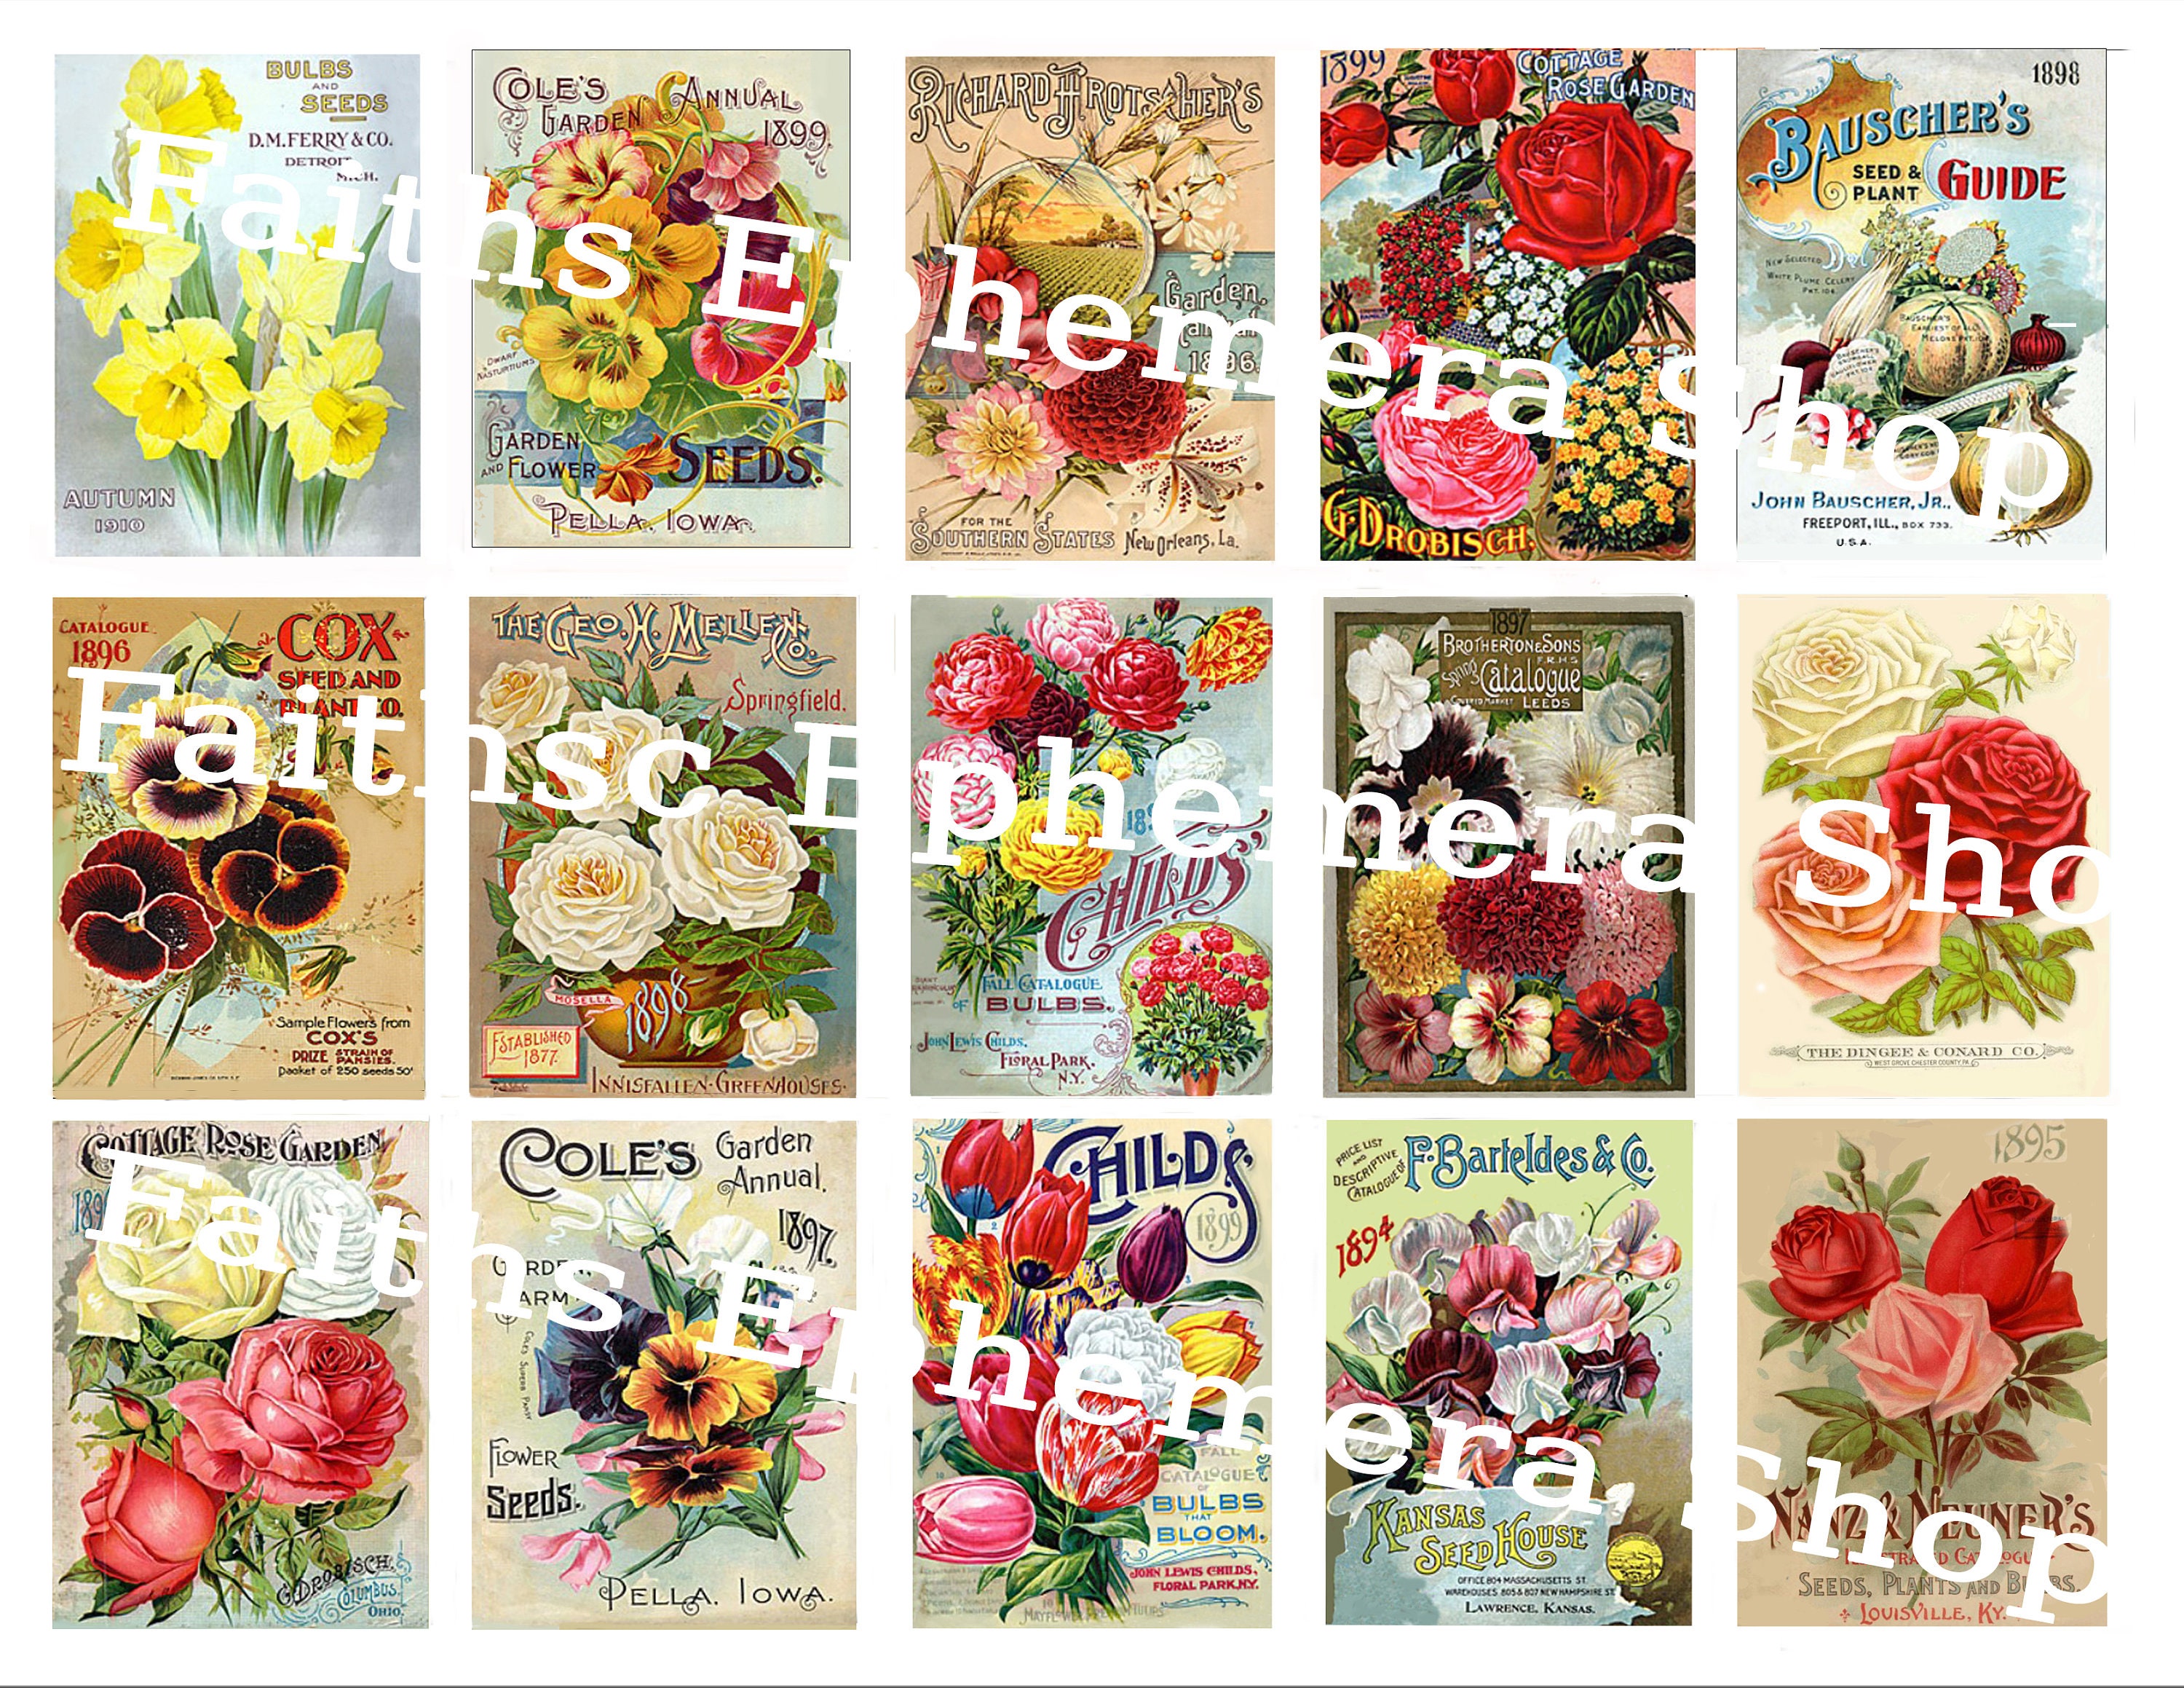 New Find! Lot of 10 Vintage 1934 Better Homes Flower Seed Packets from  Crosman Seed Co., East Rochester, NY!